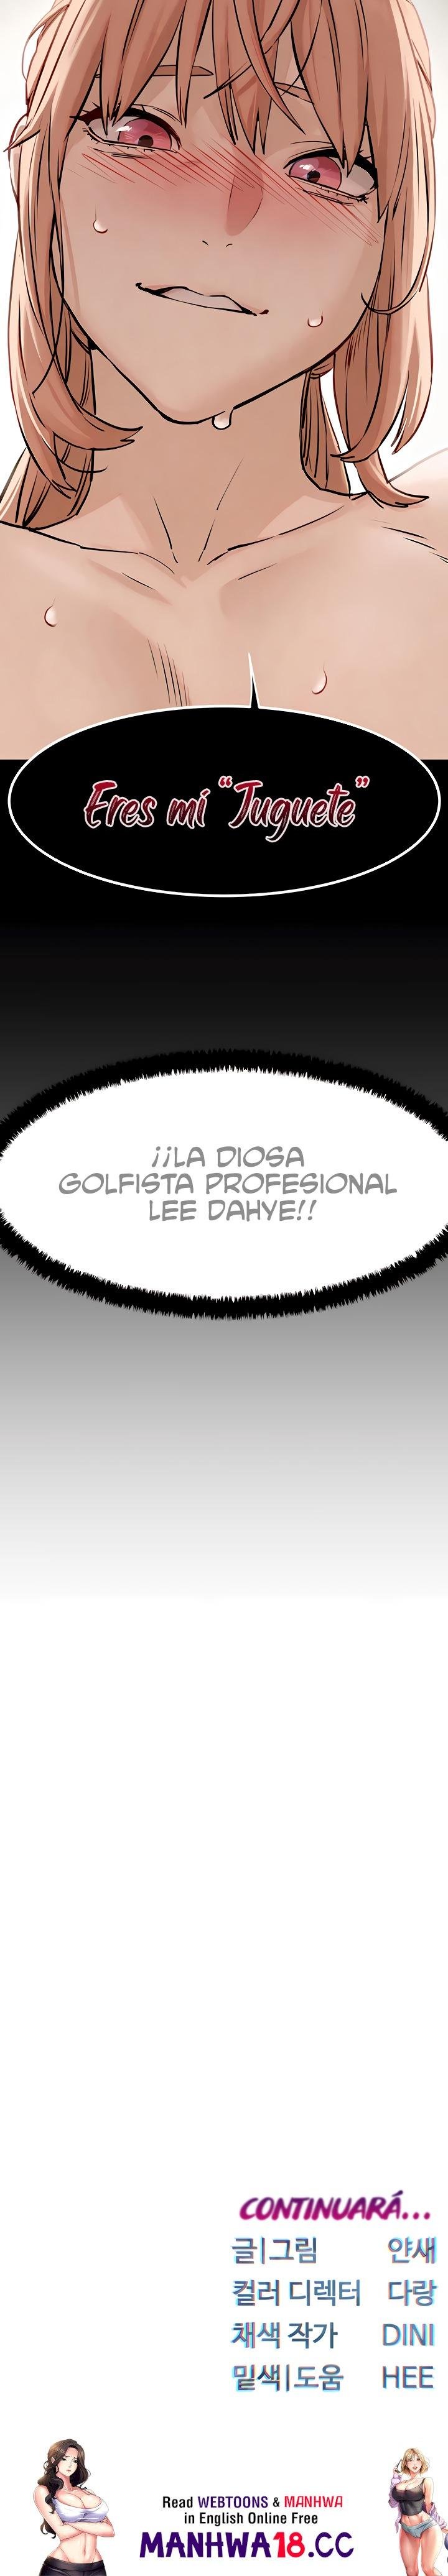 moby-dick-raw-chap-8-26